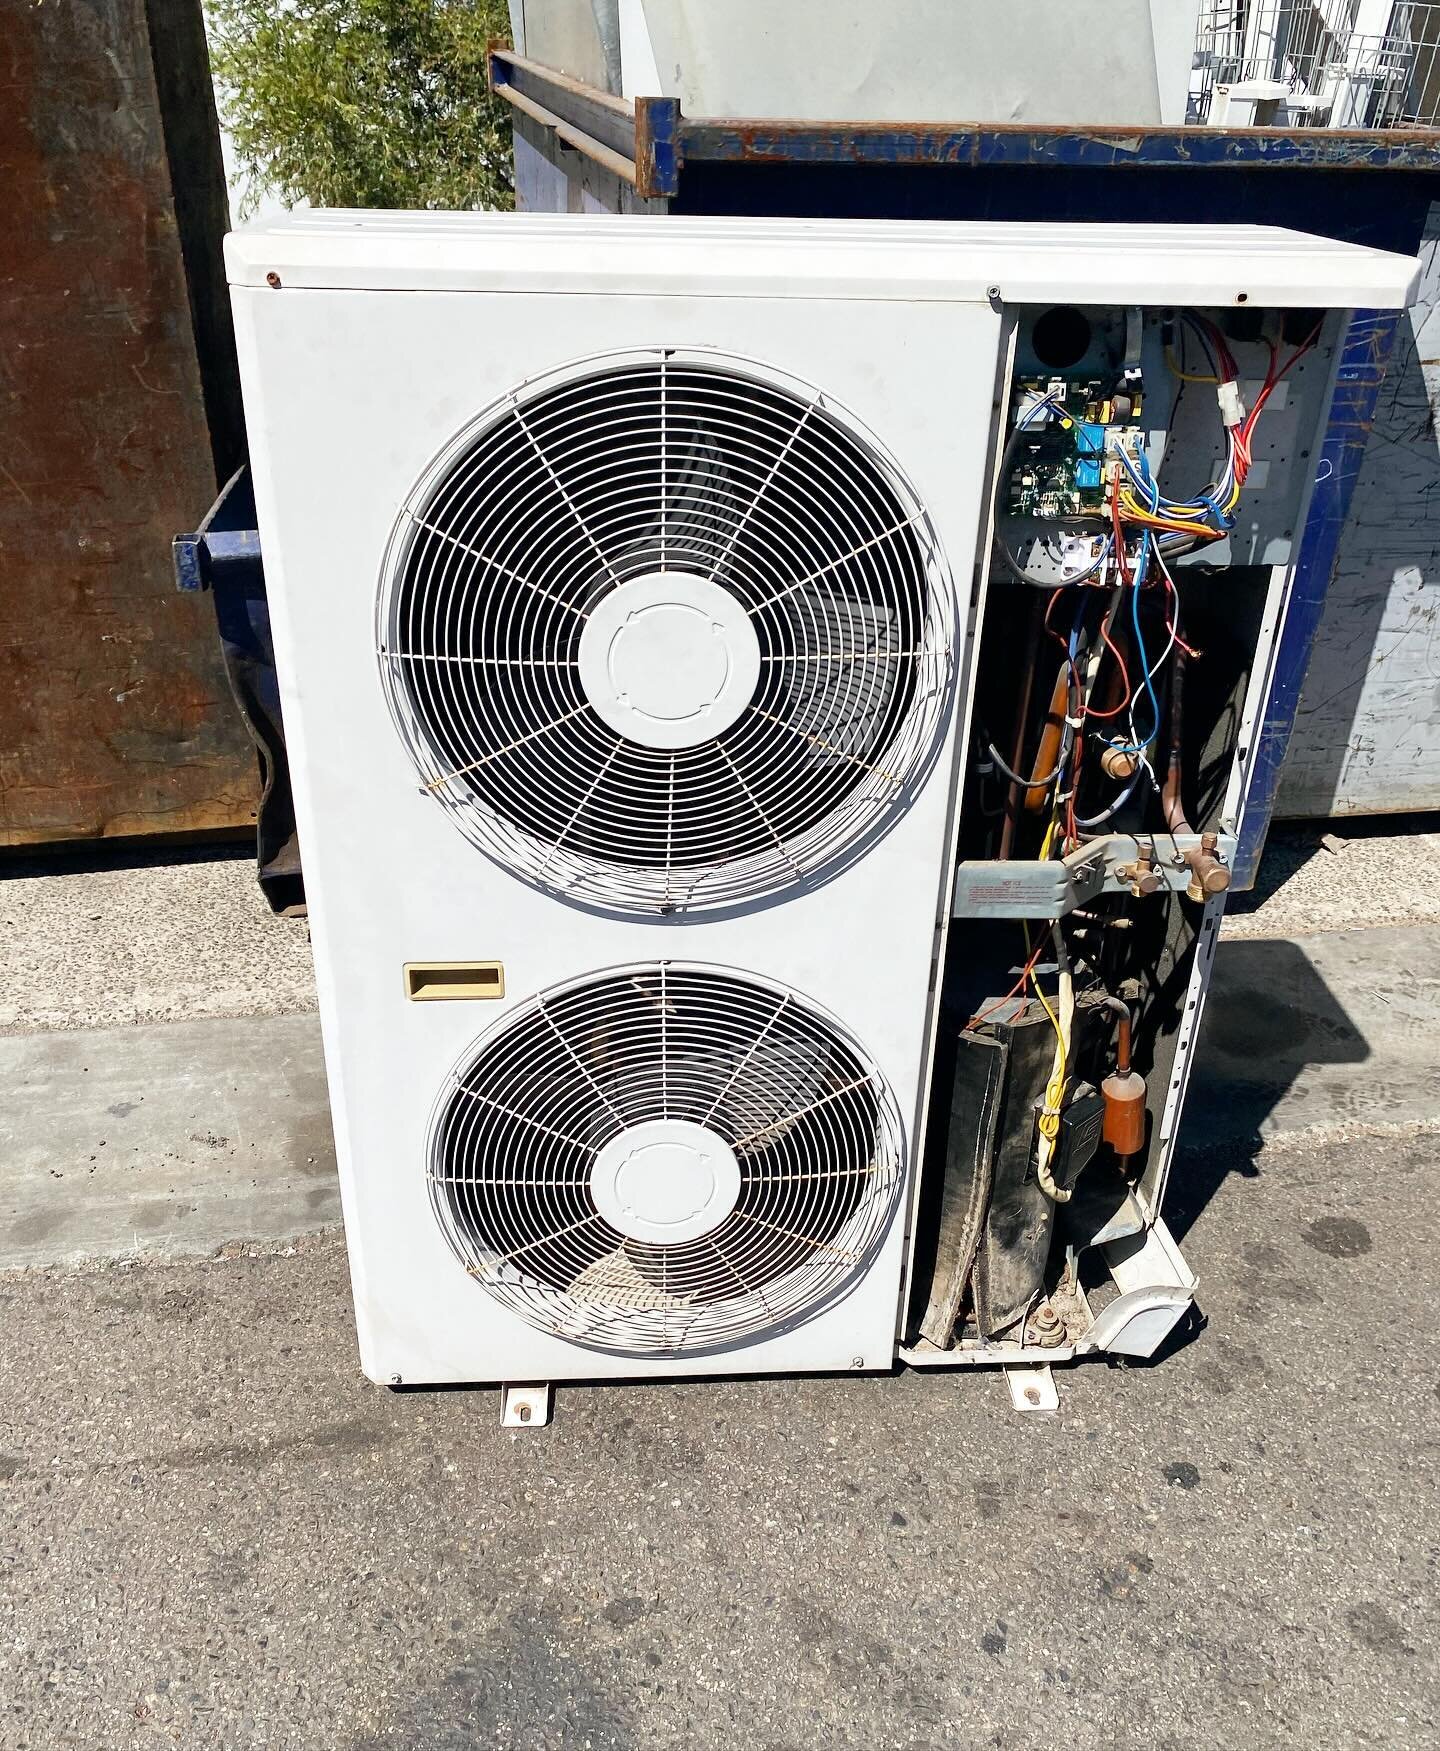 Add on air conditioning replacement. Out with the old, in with the new @actron.air high efficiency air conditioning system ⁣
⁣
⁣
#addonaircon #actron #summer